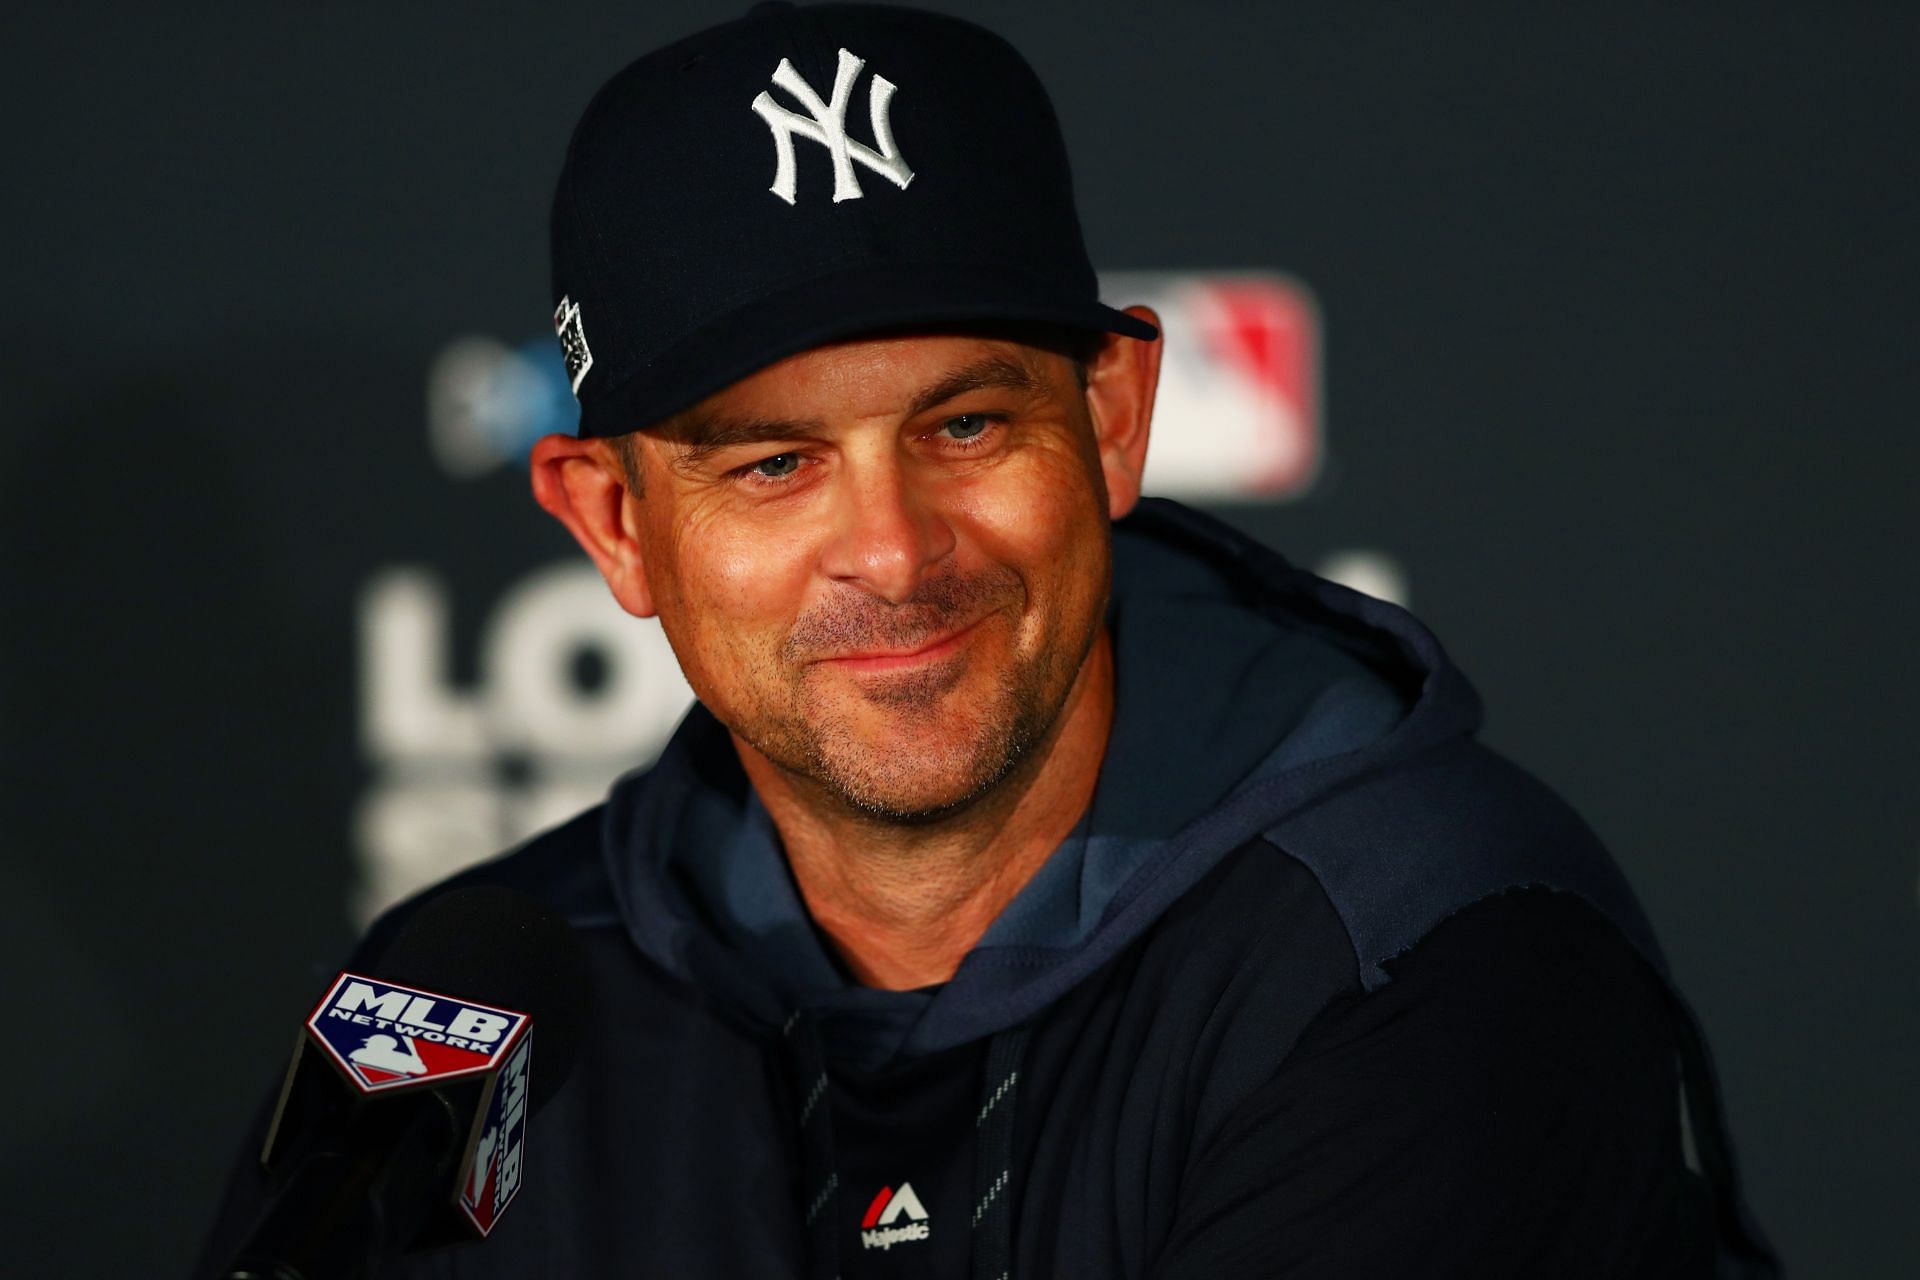 Previews - New York Yankees v Boston Red Sox: LONDON, ENGLAND - JUNE 28: New York Yankees manager Aaron Boone speaks with members of the media during a press conference ahead of the MLB London Series games between Boston Red Sox and New York Yankees at London Stadium on June 28, 2019, in London, England. (Photo by Dan Istitene/Getty Images)